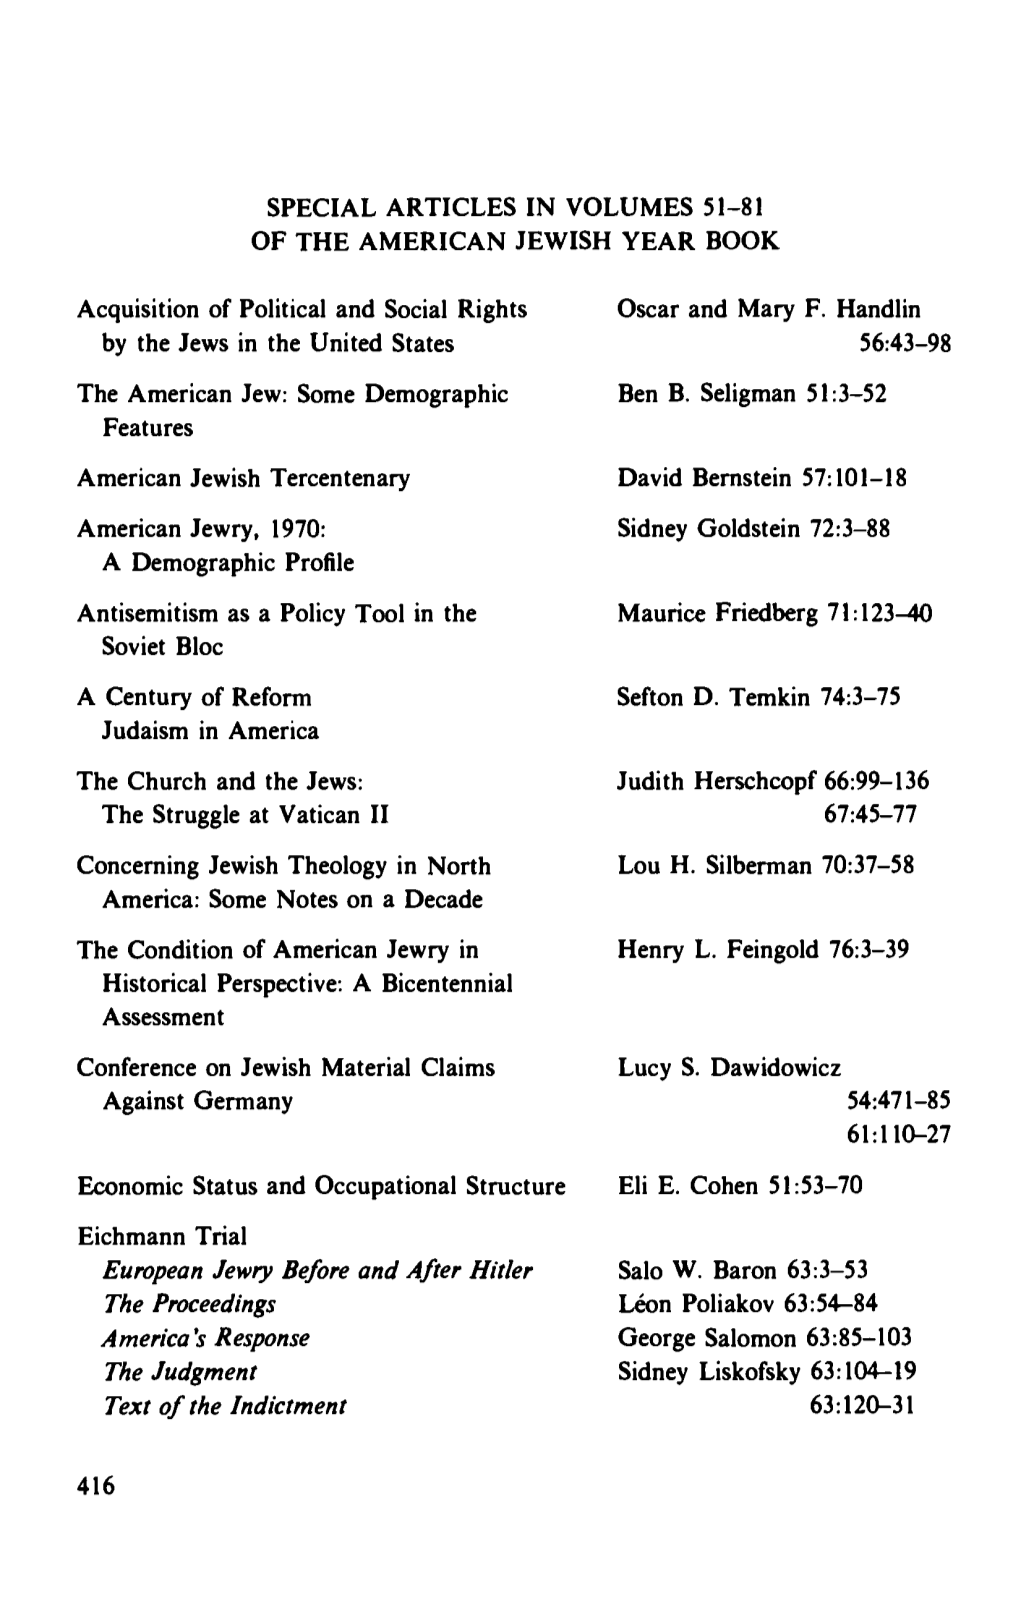 Special Articles in Volumes 51-81 of the American Jewish Year Book